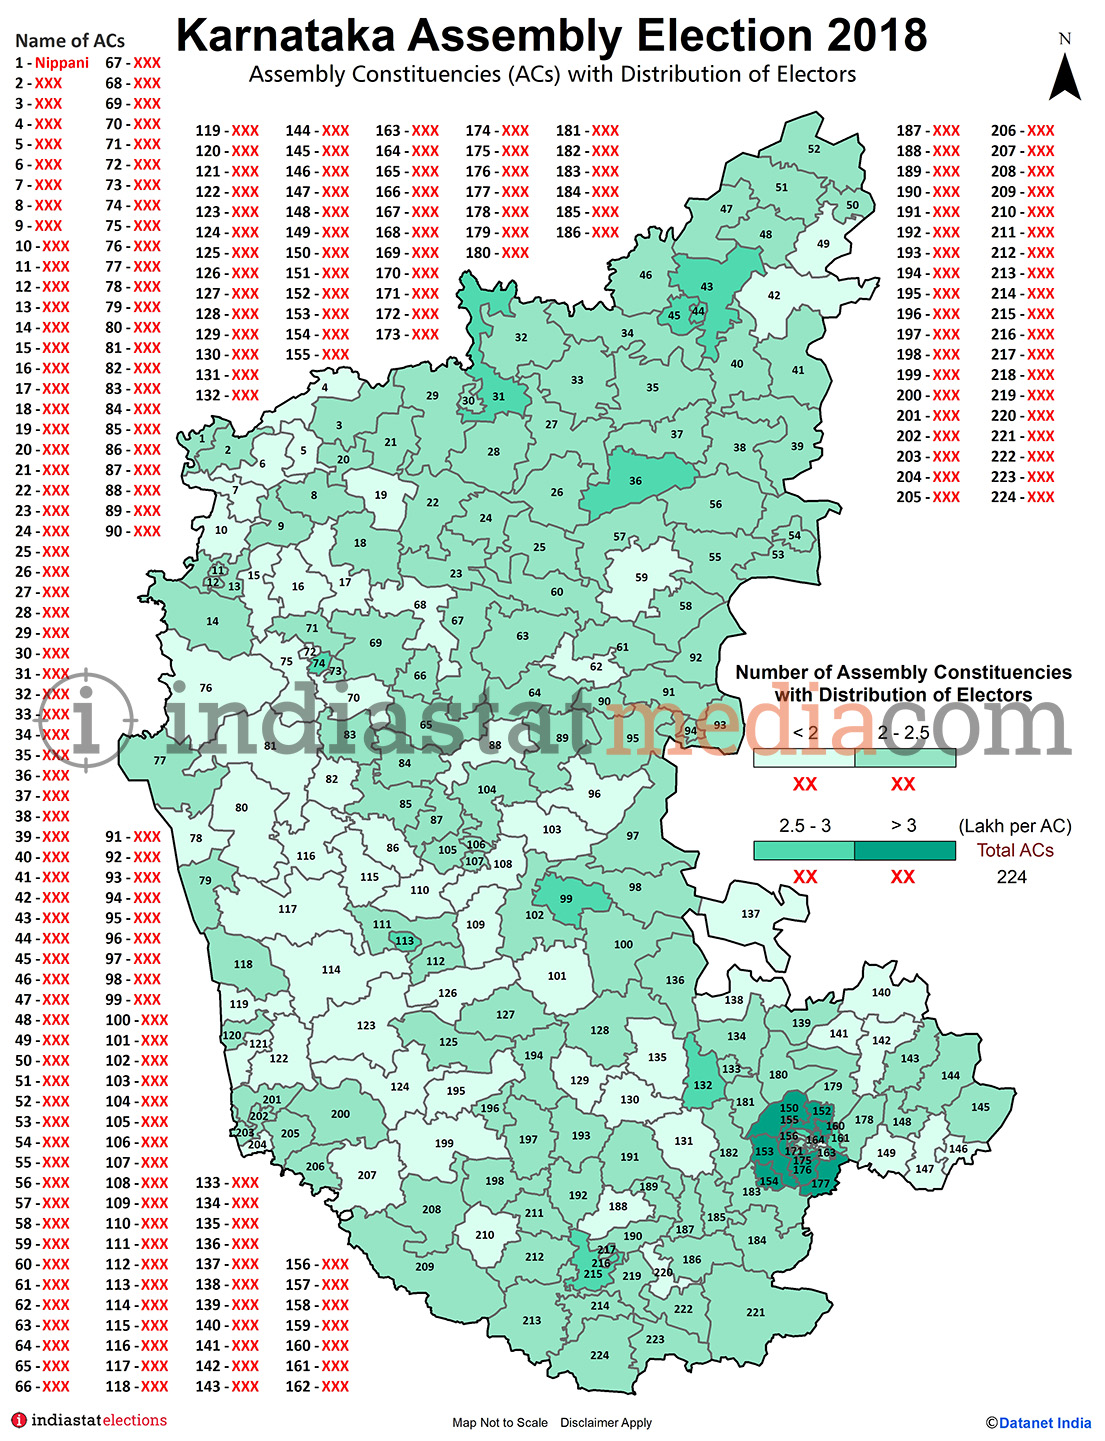 Assembly Constituencies (ACs) with Distribution of Electors in Karnataka (Assembly Election - 2018)